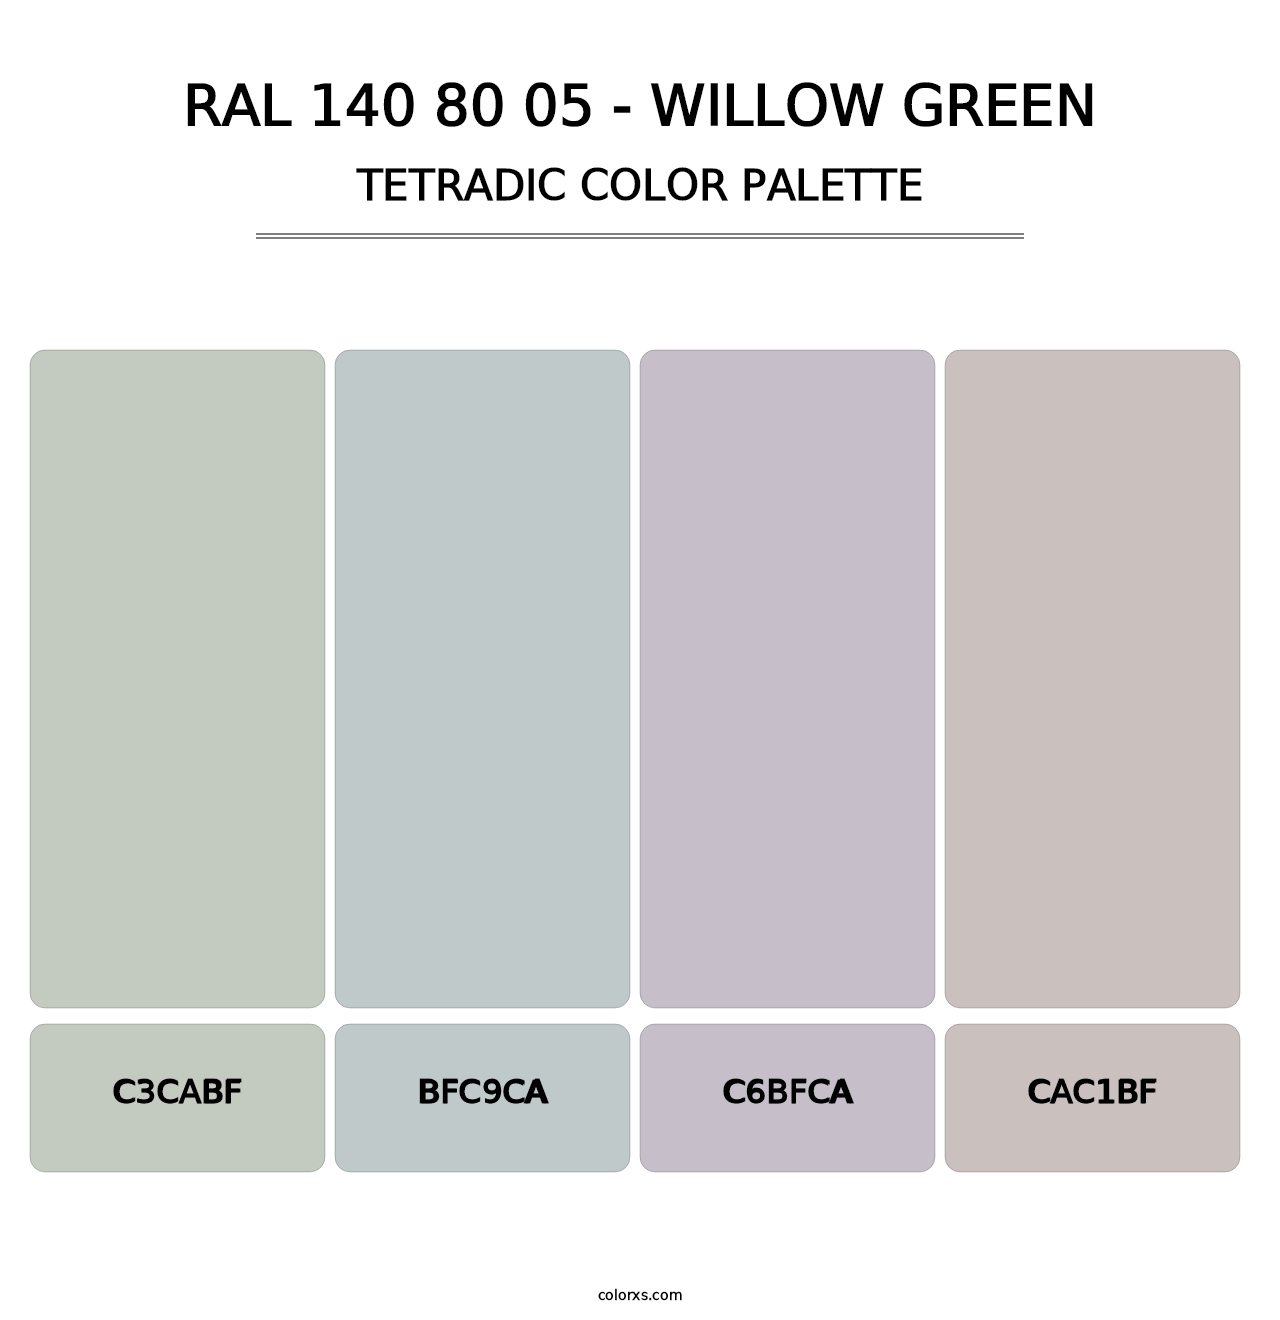 RAL 140 80 05 - Willow Green - Tetradic Color Palette